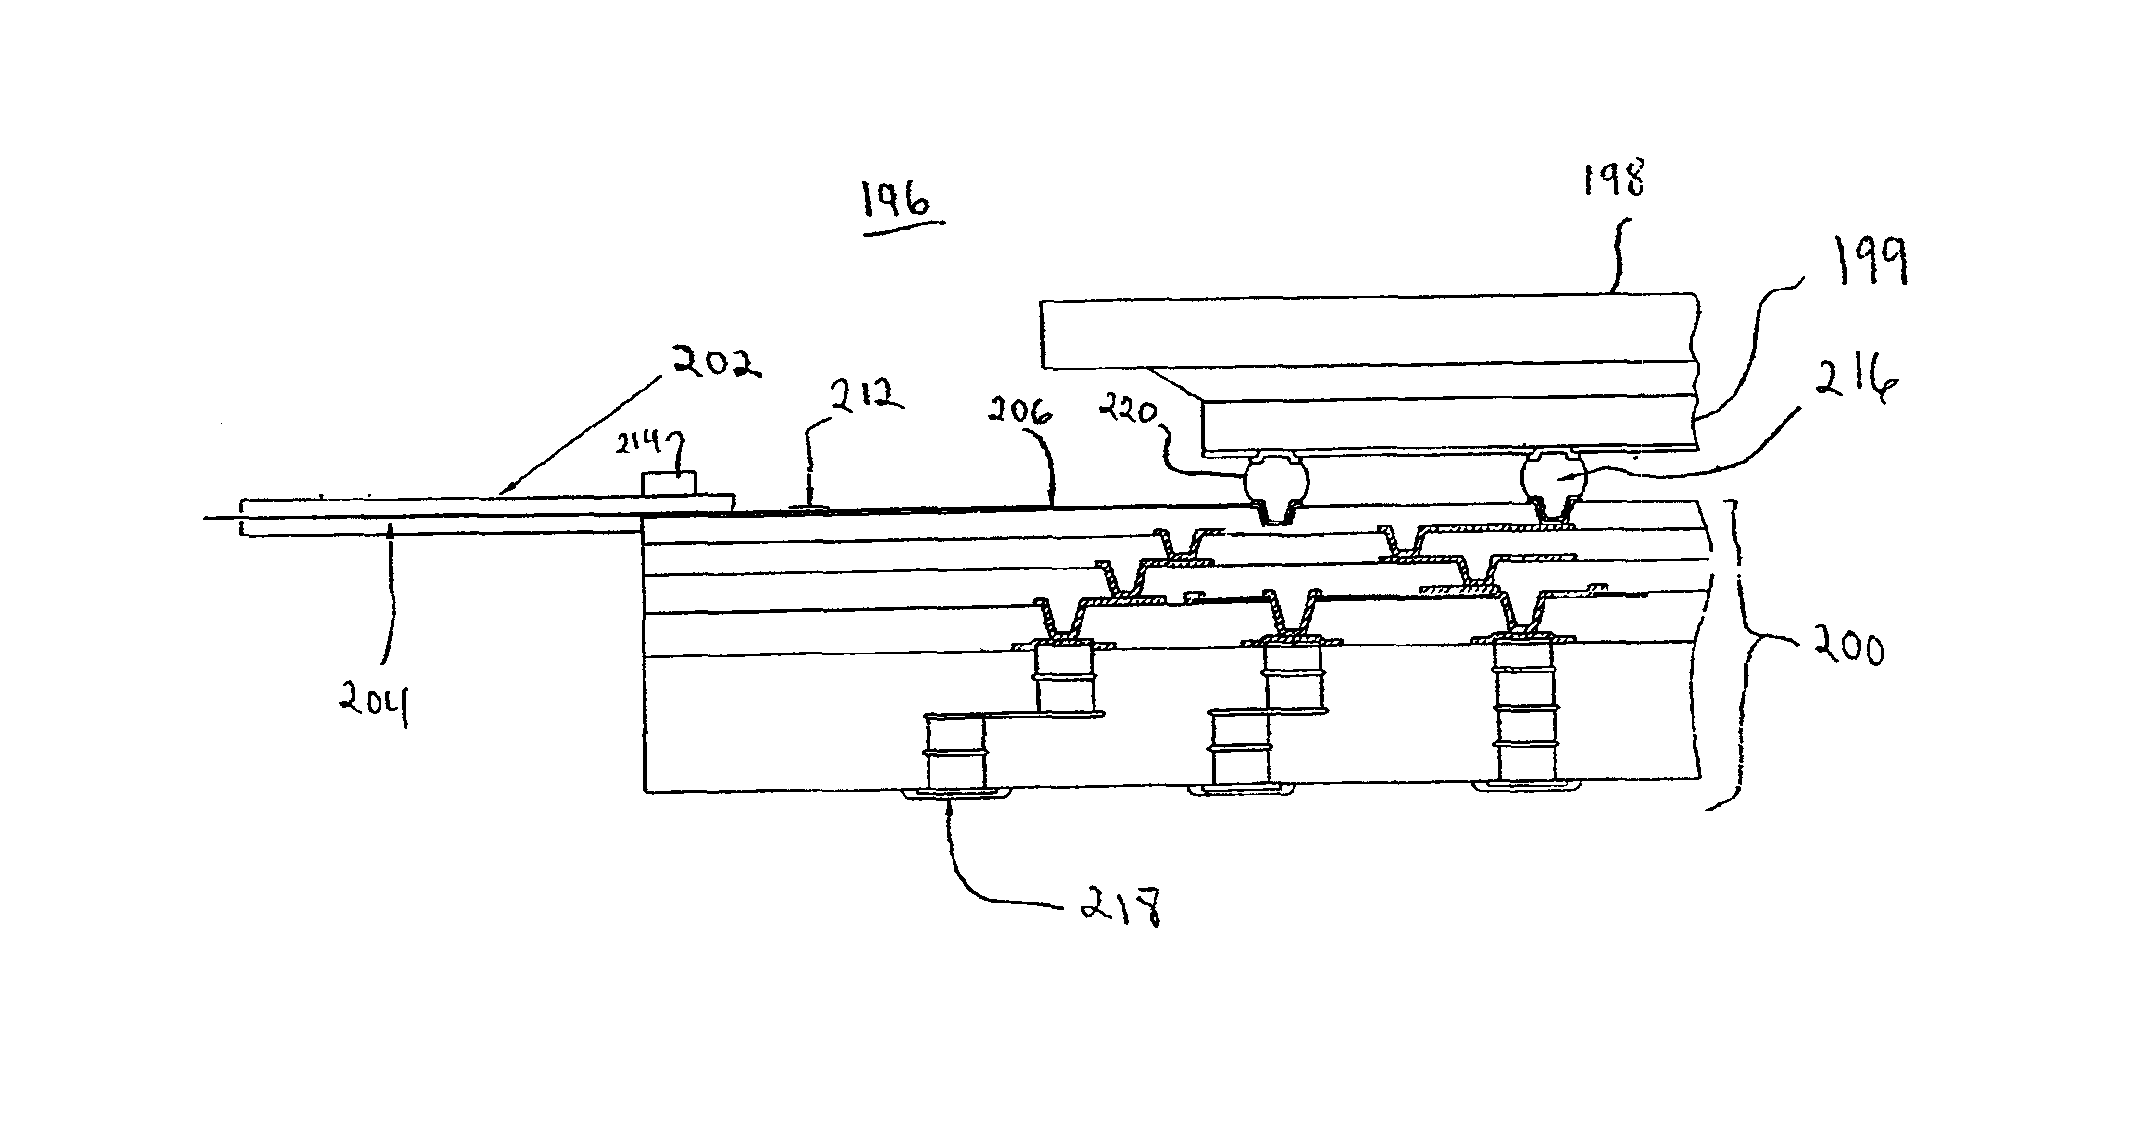 High frequency signal transmission from the surface of a circuit substrate to a flexible interconnect cable